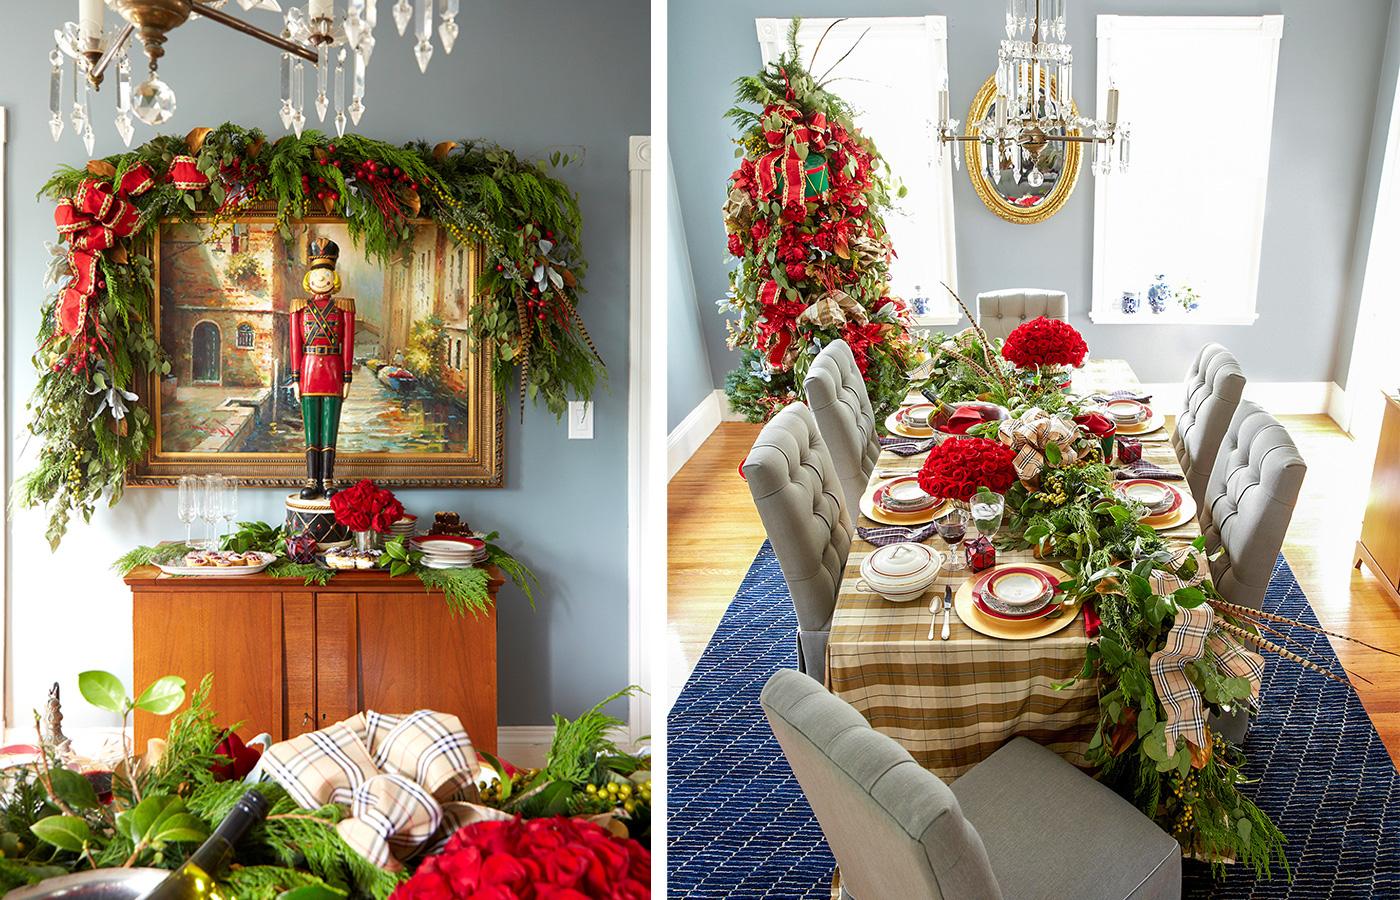 Holiday table setting and buffet decorated with greenery